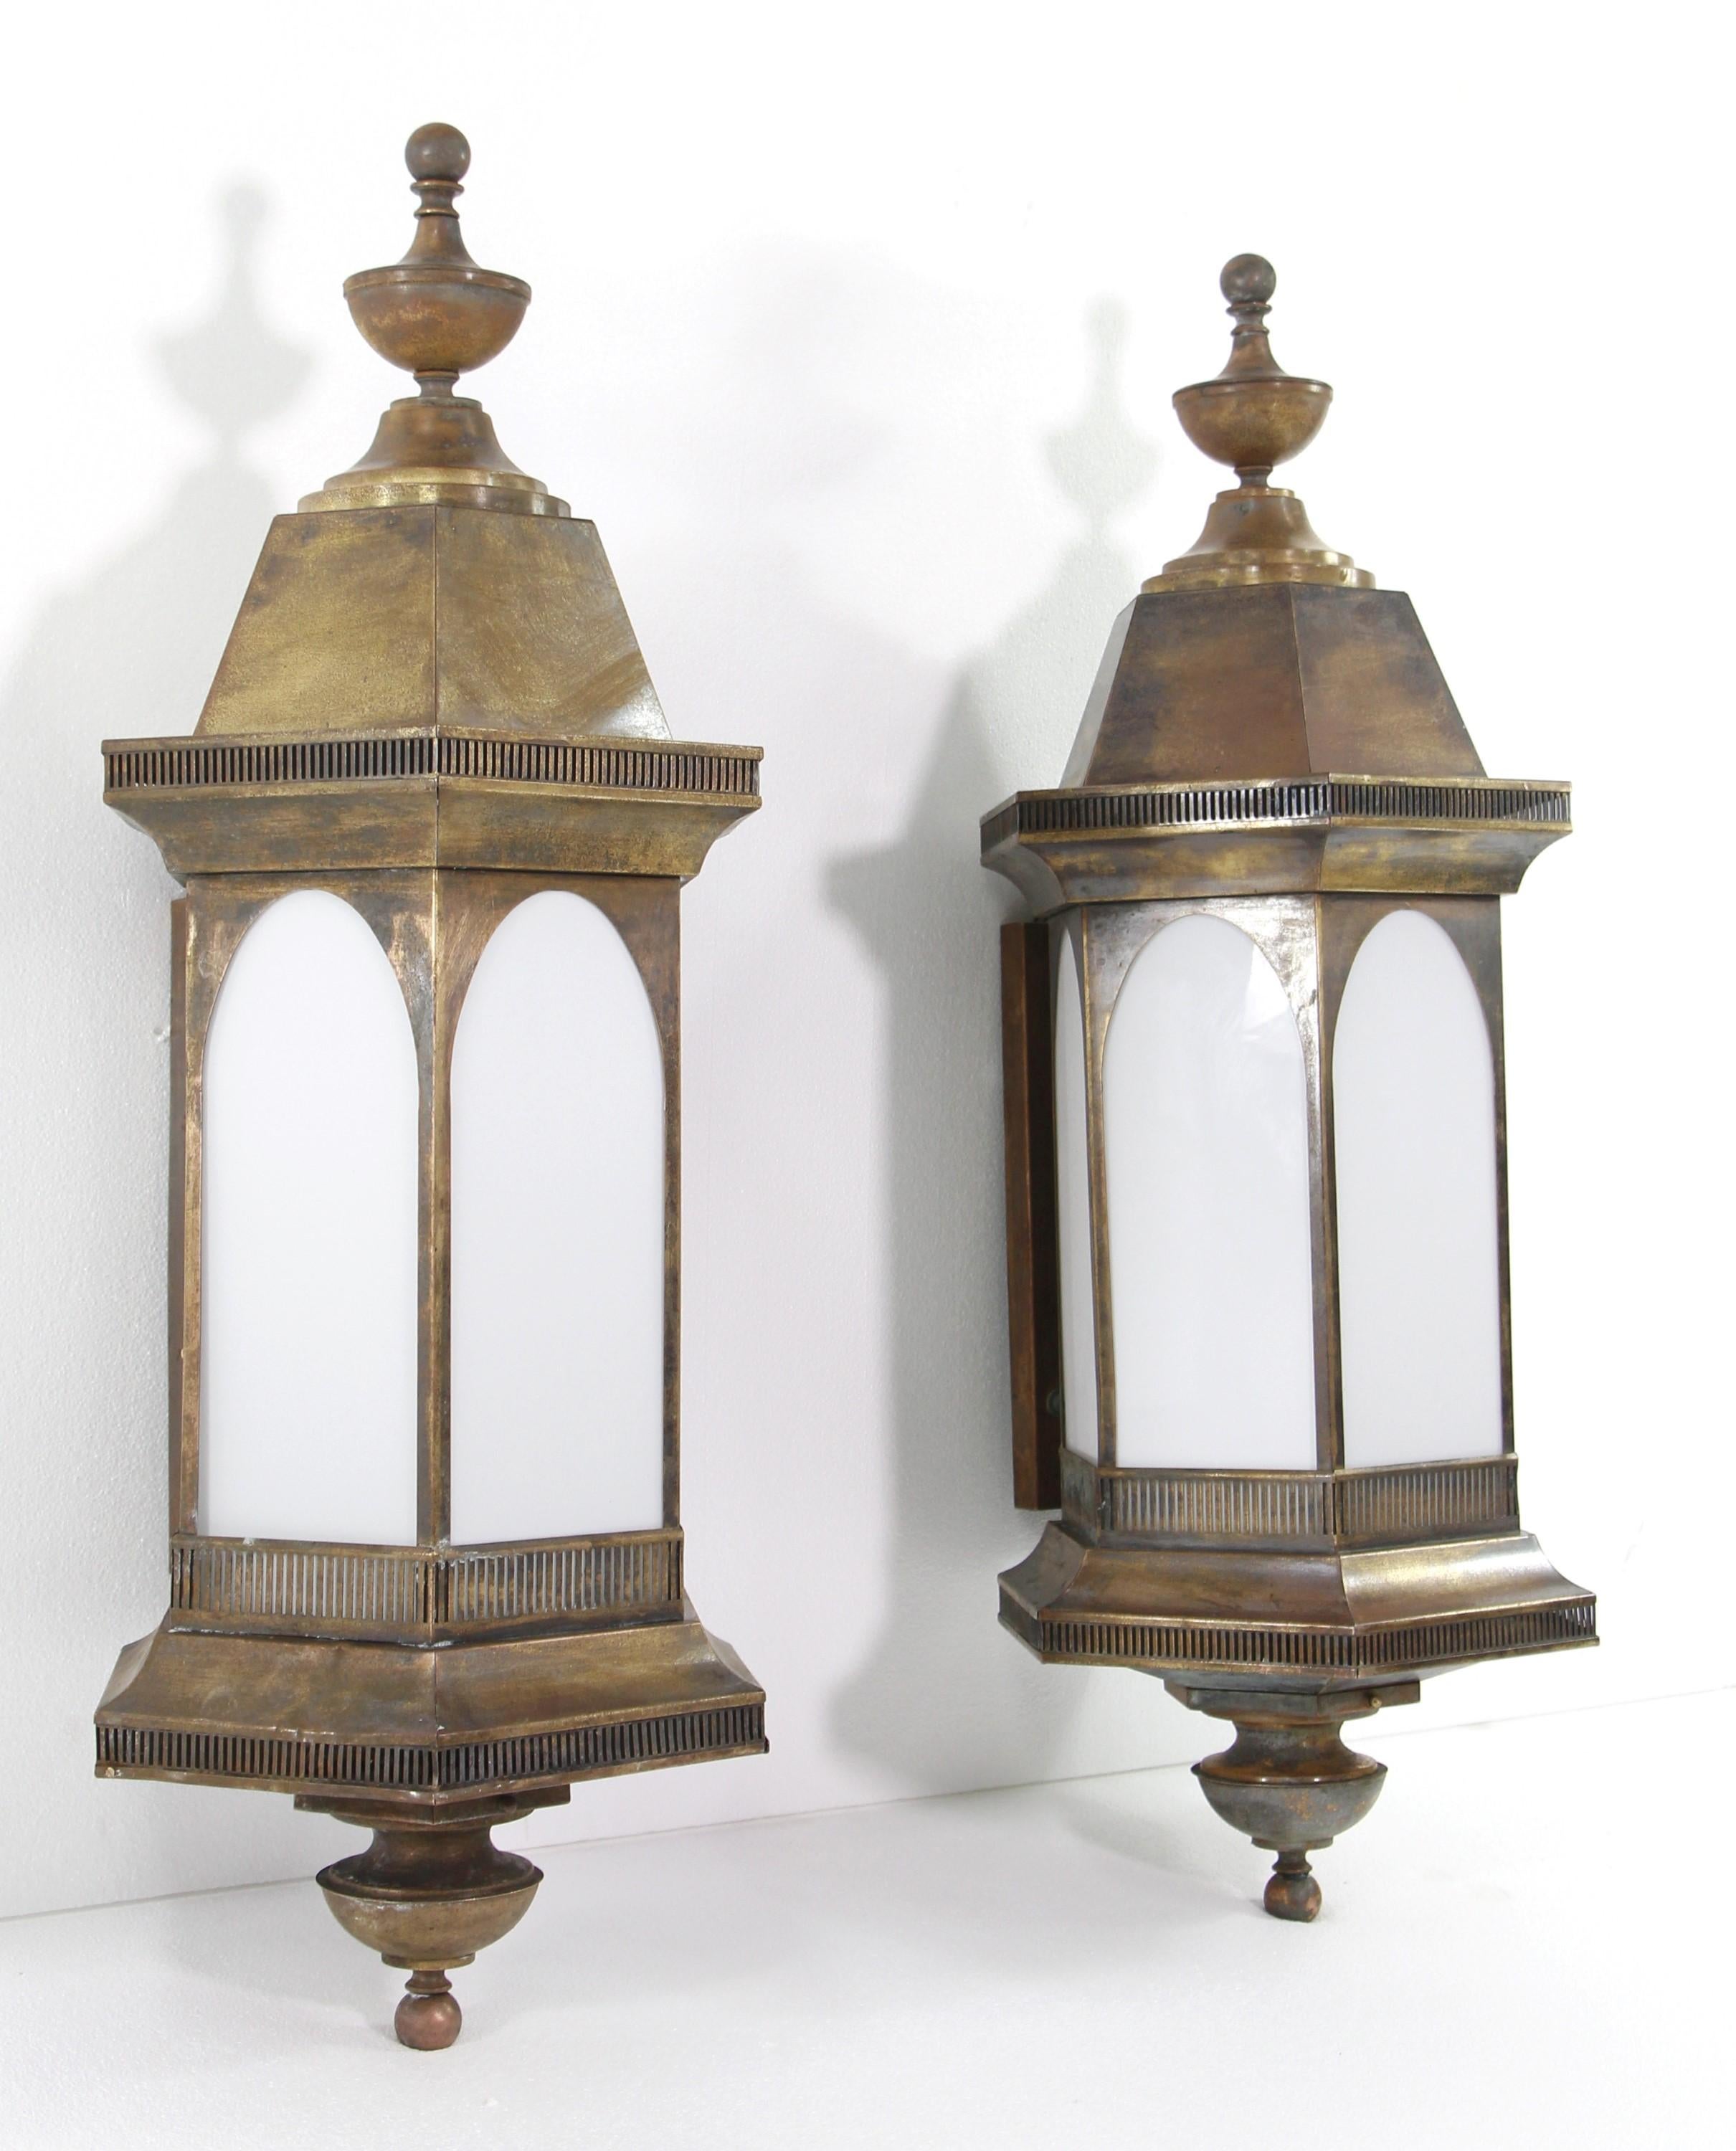 Early 20th century pair of exterior red brass wall sconces in an arched Gothic design. These feature white glass panes. Cleaned and restored. Priced as a pair.